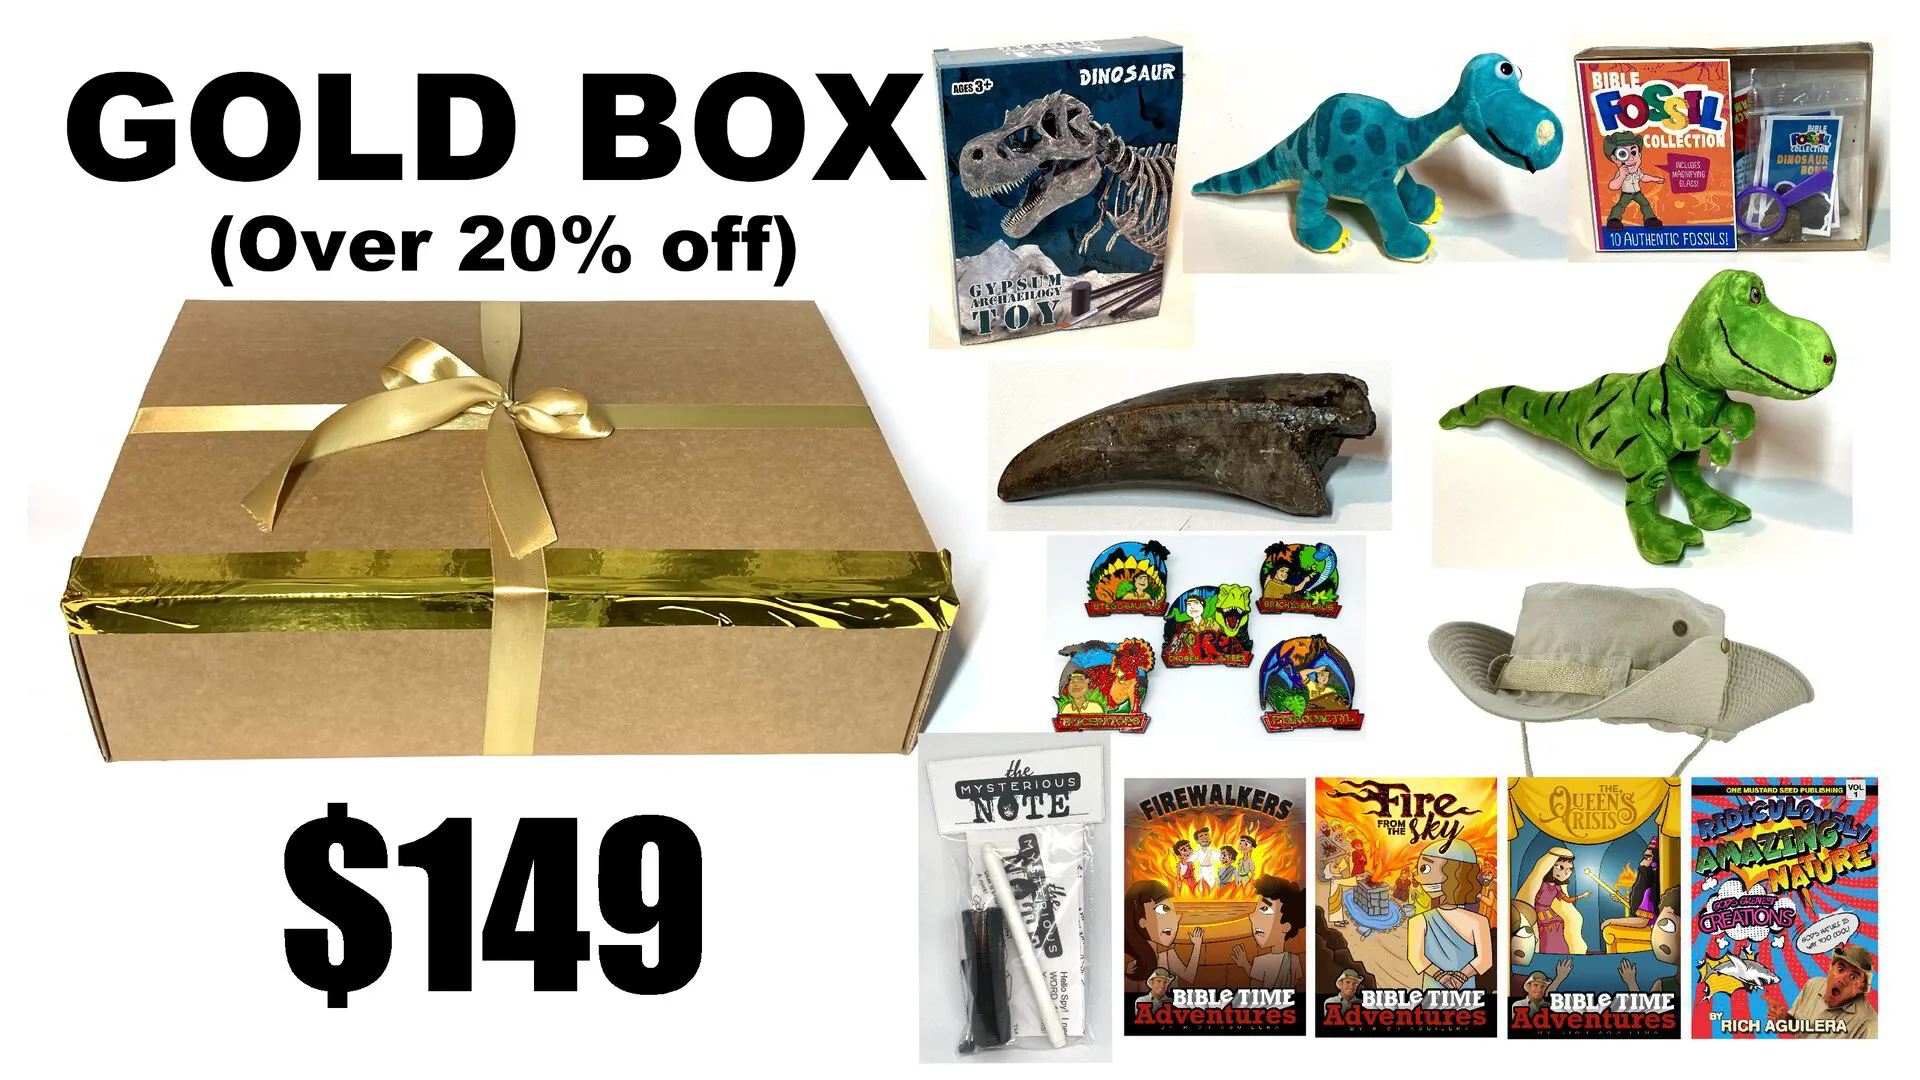 THE GOLD BOX! (20% Discount) - FREE SHIPPING!